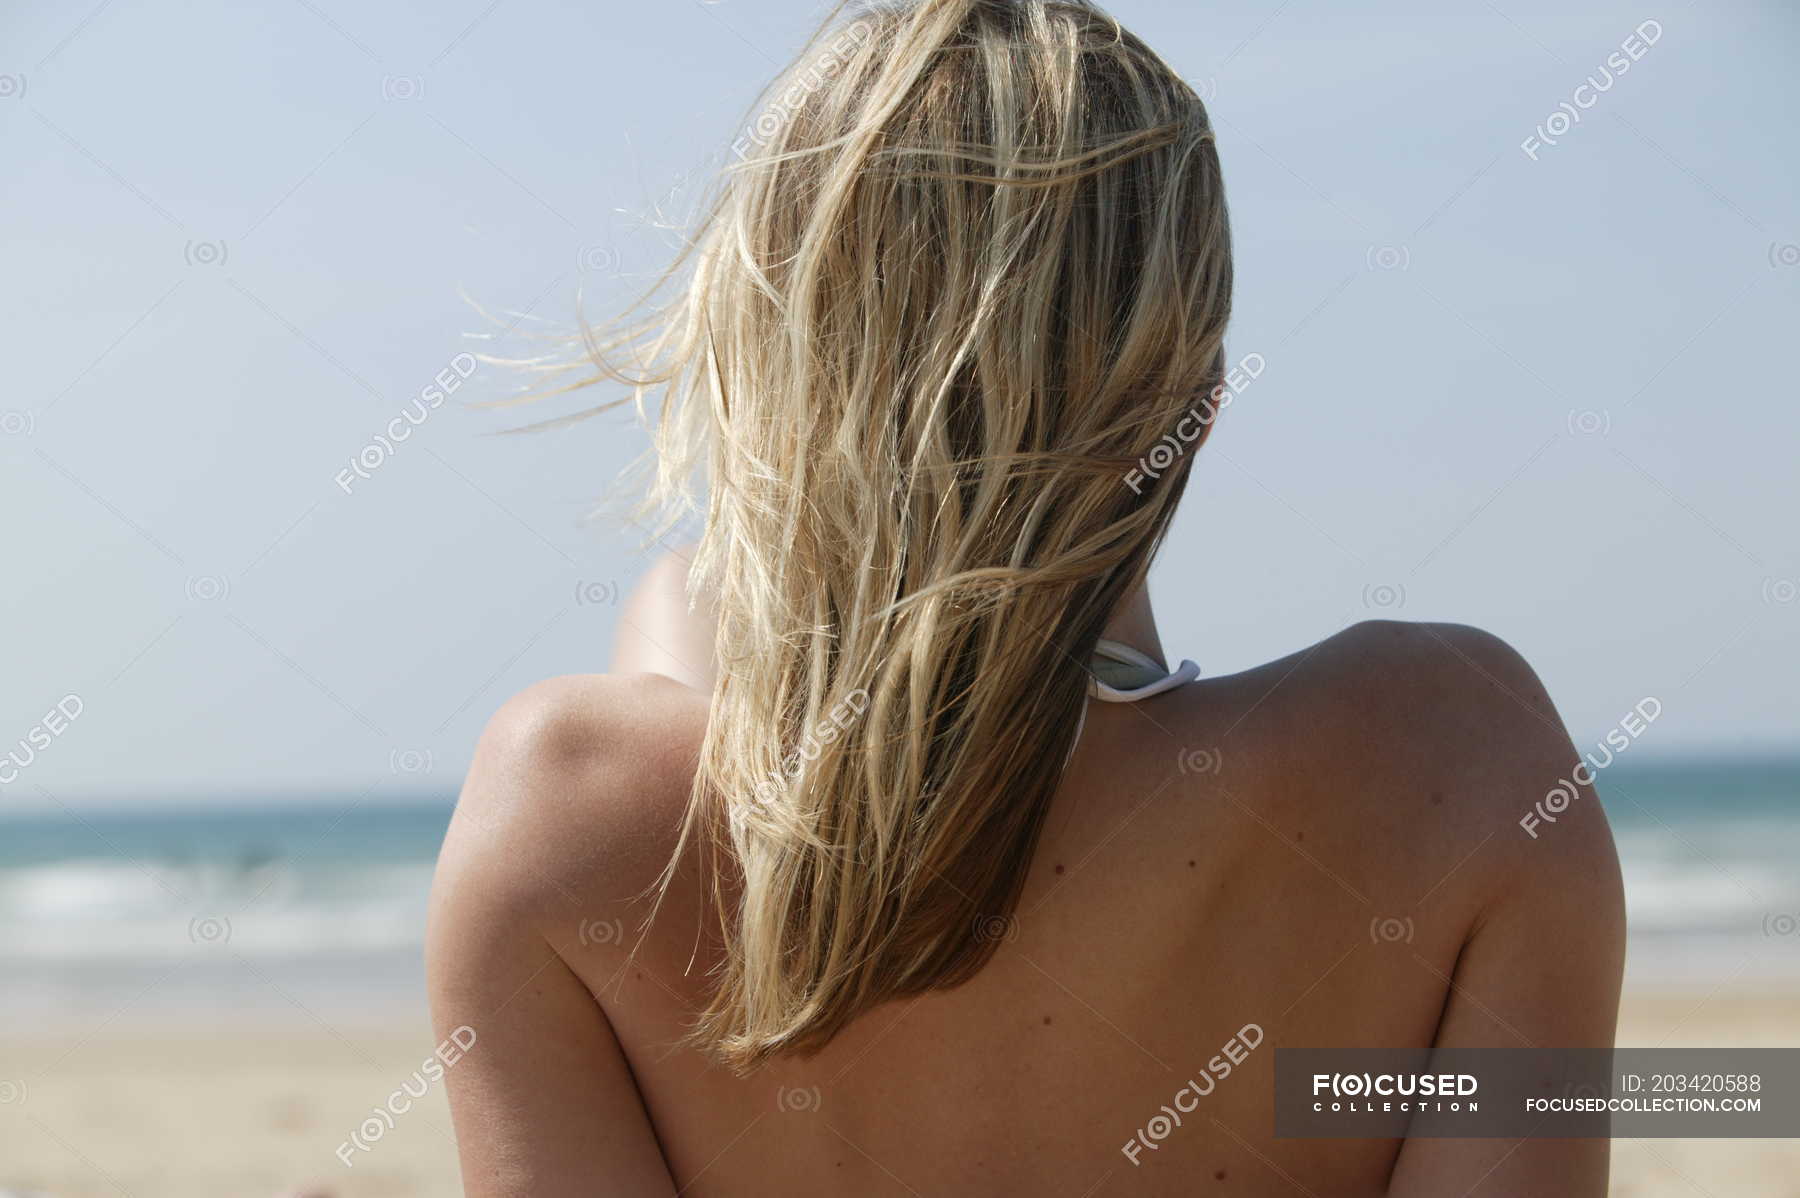 Blonde Hair Woman On Beach Relaxing View Holiday Stock Photo